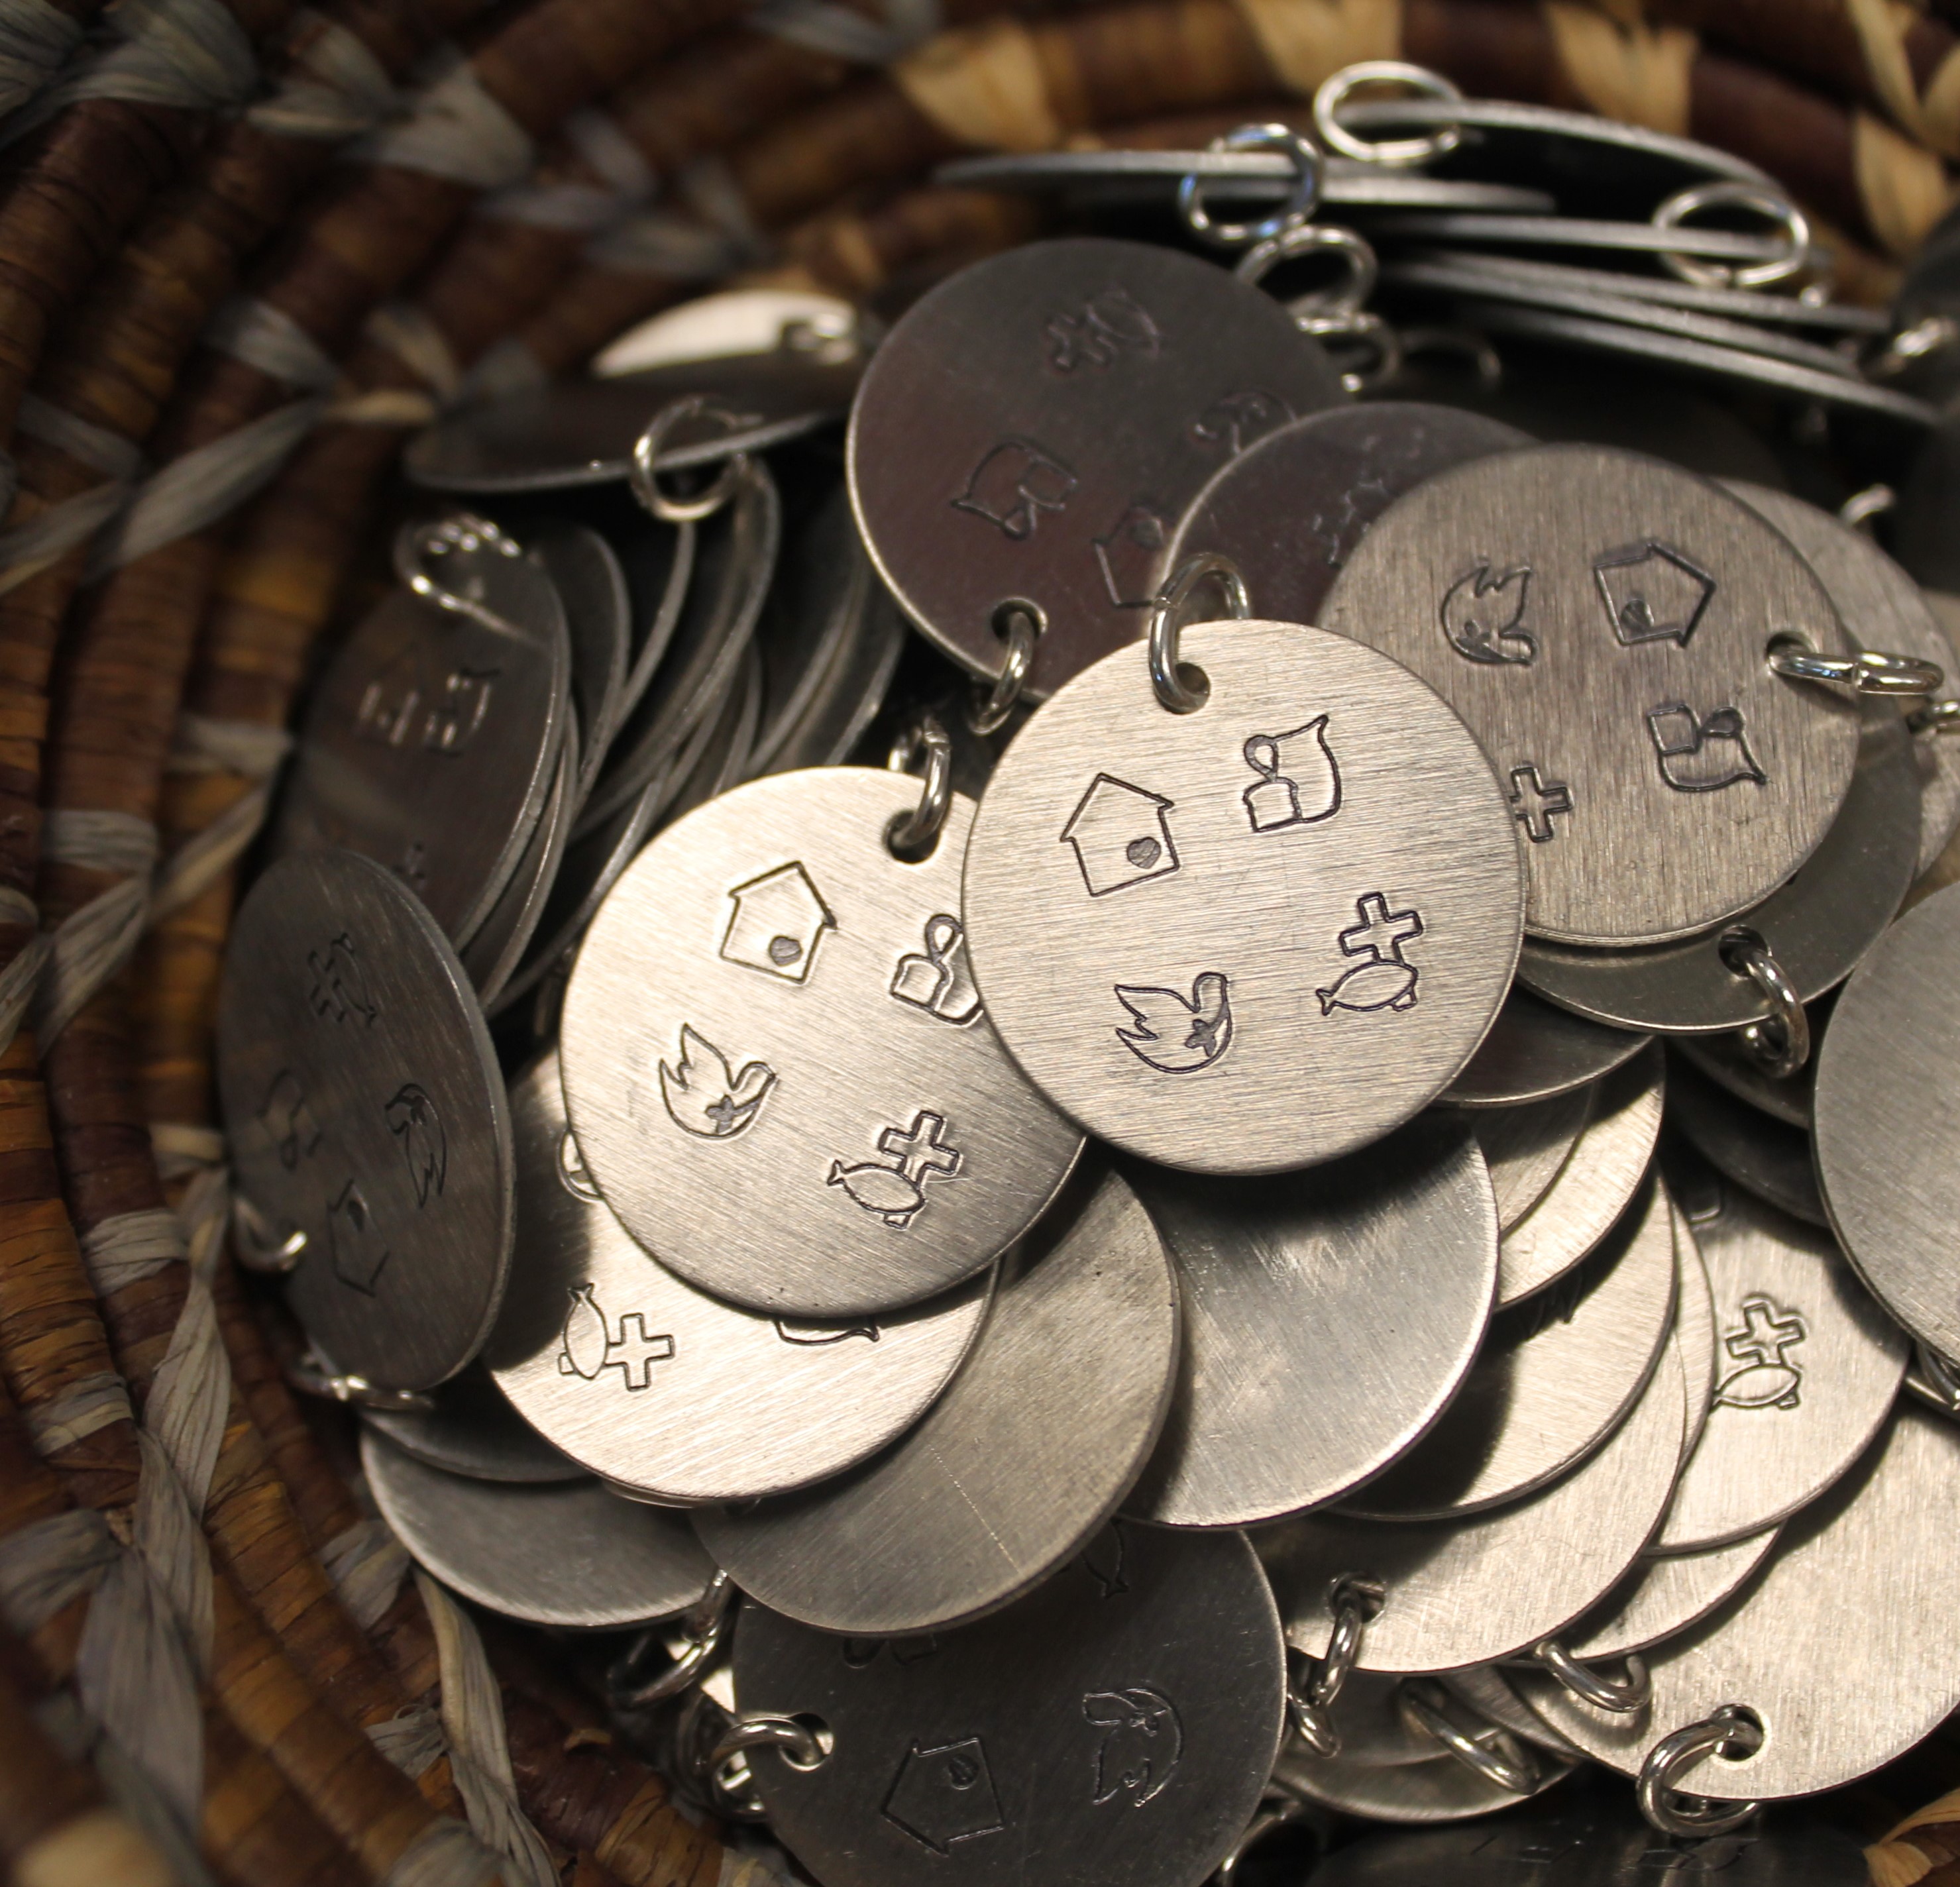 round stainless steel pendants in a basket. Each pendant has an etched stamp of a house, bread and a jug, a dove, and a fish and cross